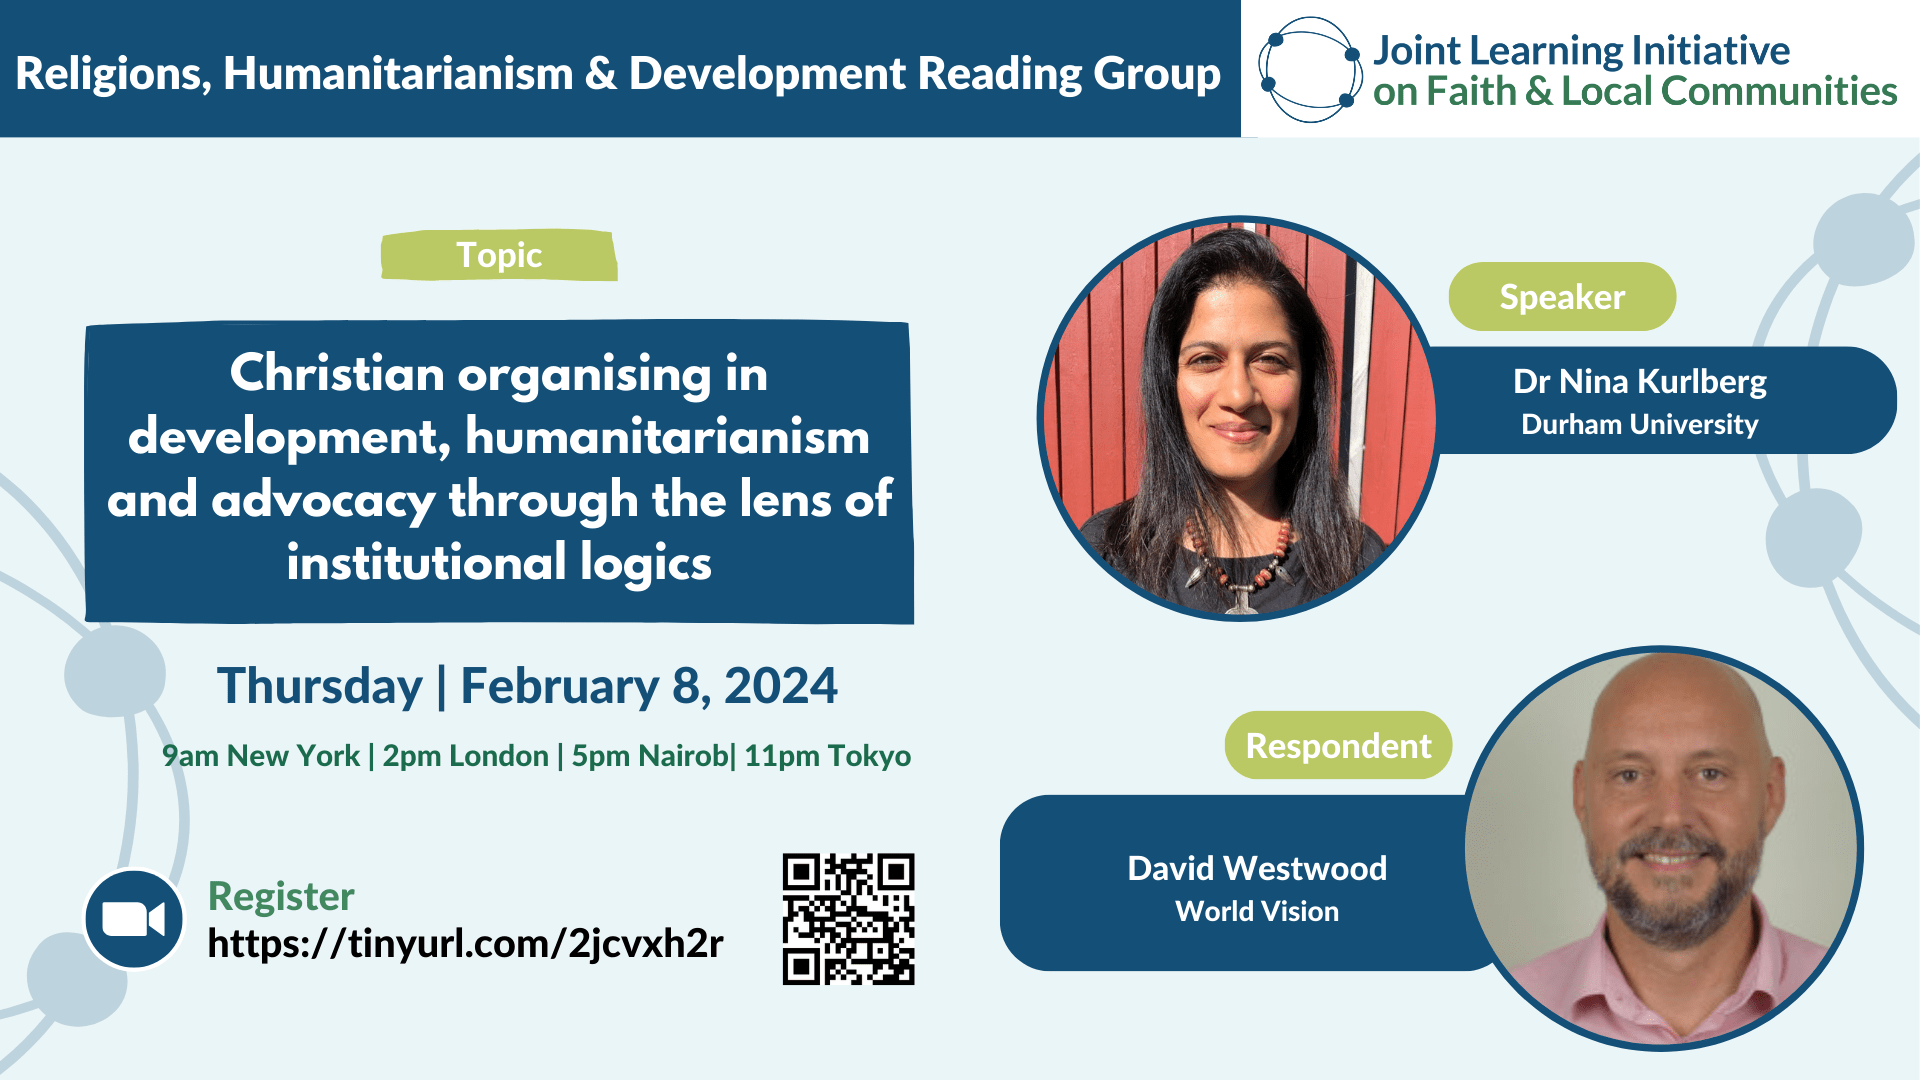 February 8 Religions, Humanitarianism & Development Reading Group: Christian organising in development, humanitarianism and advocacy through the lens of institutional logics